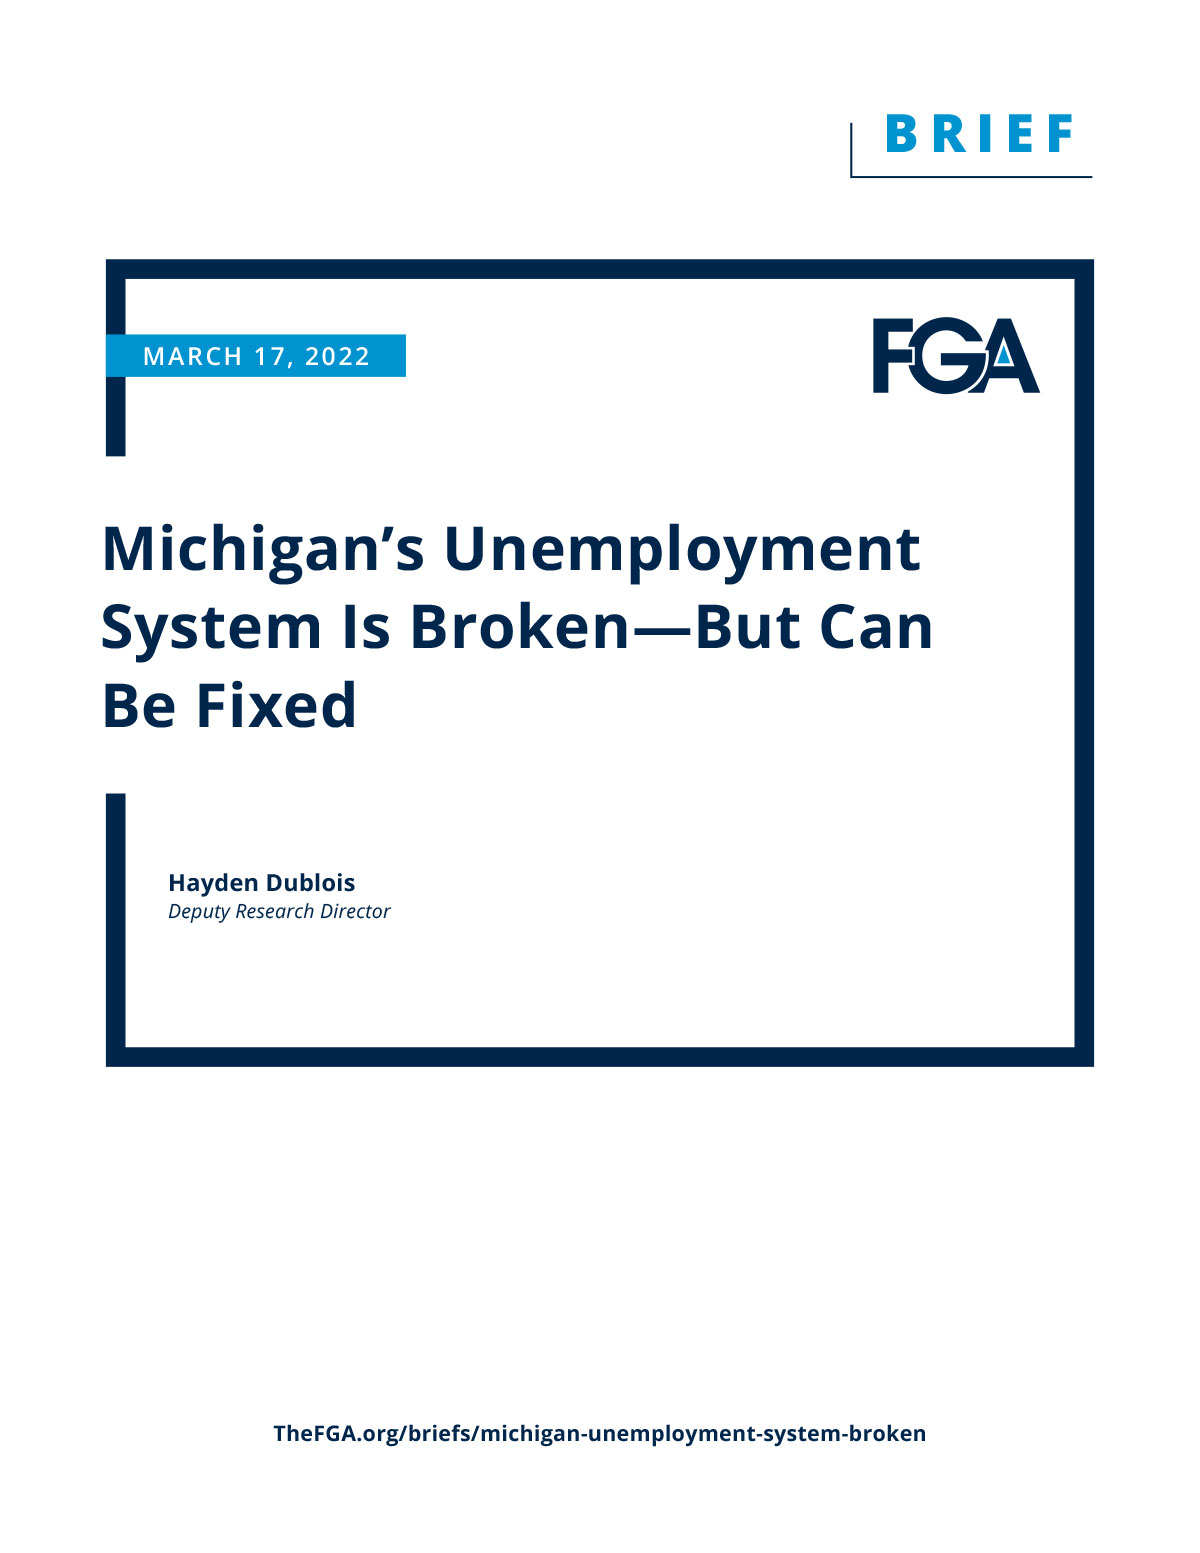 Michigan’s Unemployment System Is Broken—But Can Be Fixed